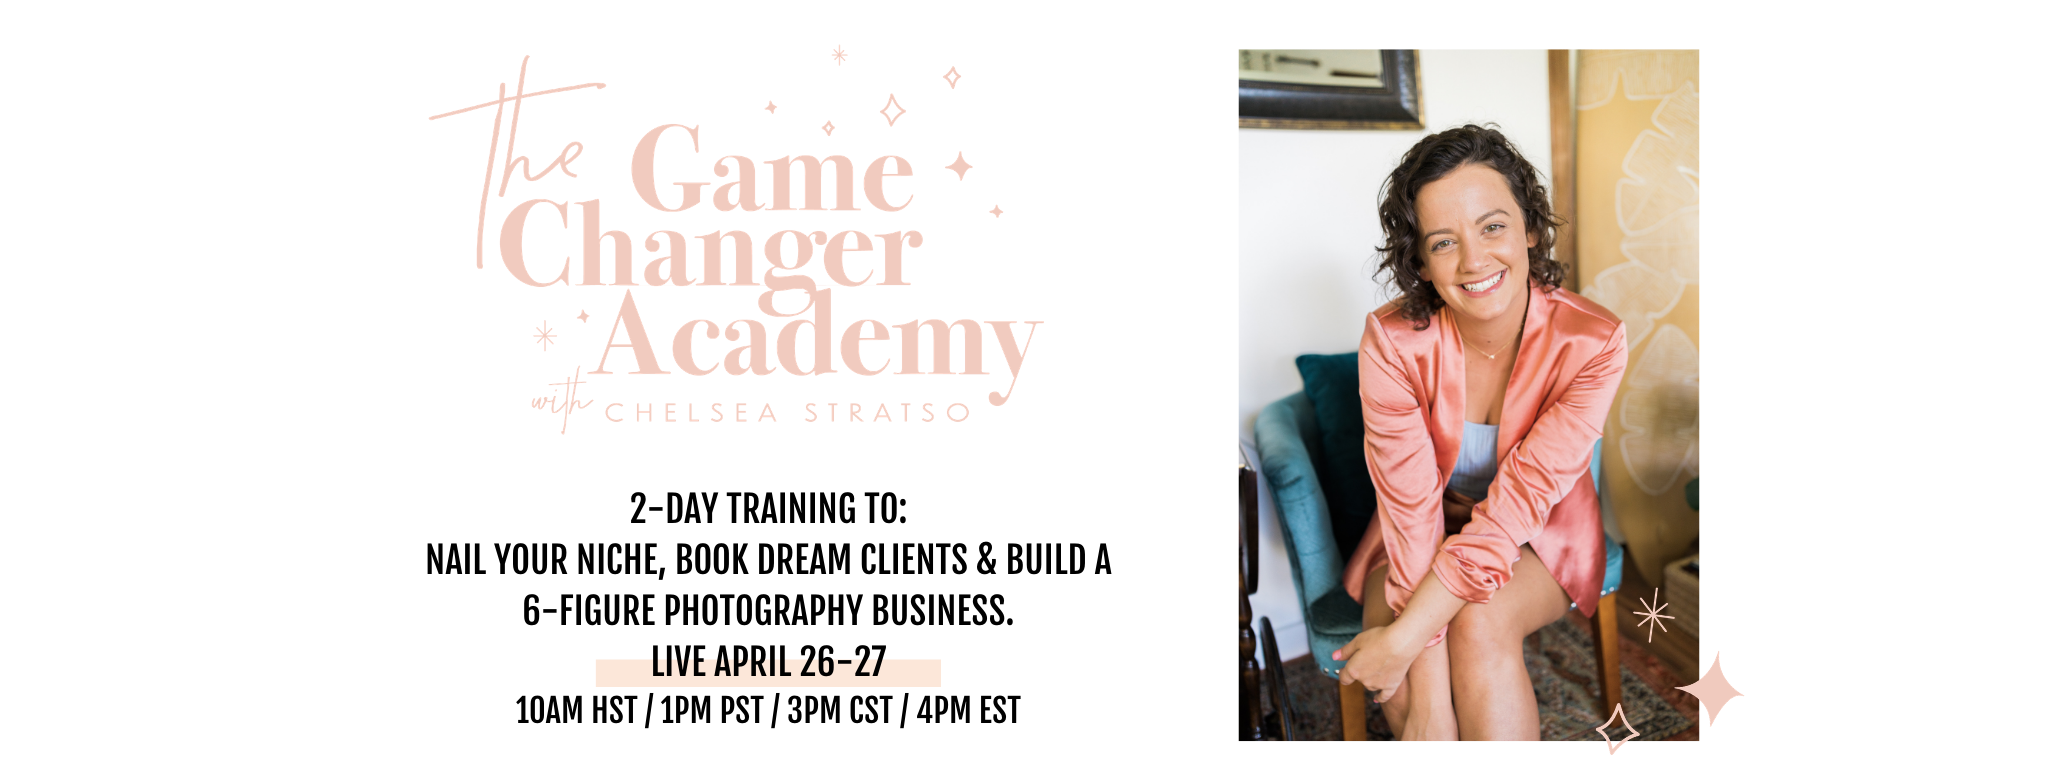 Launch party for The Game Changer academy, an online photography course